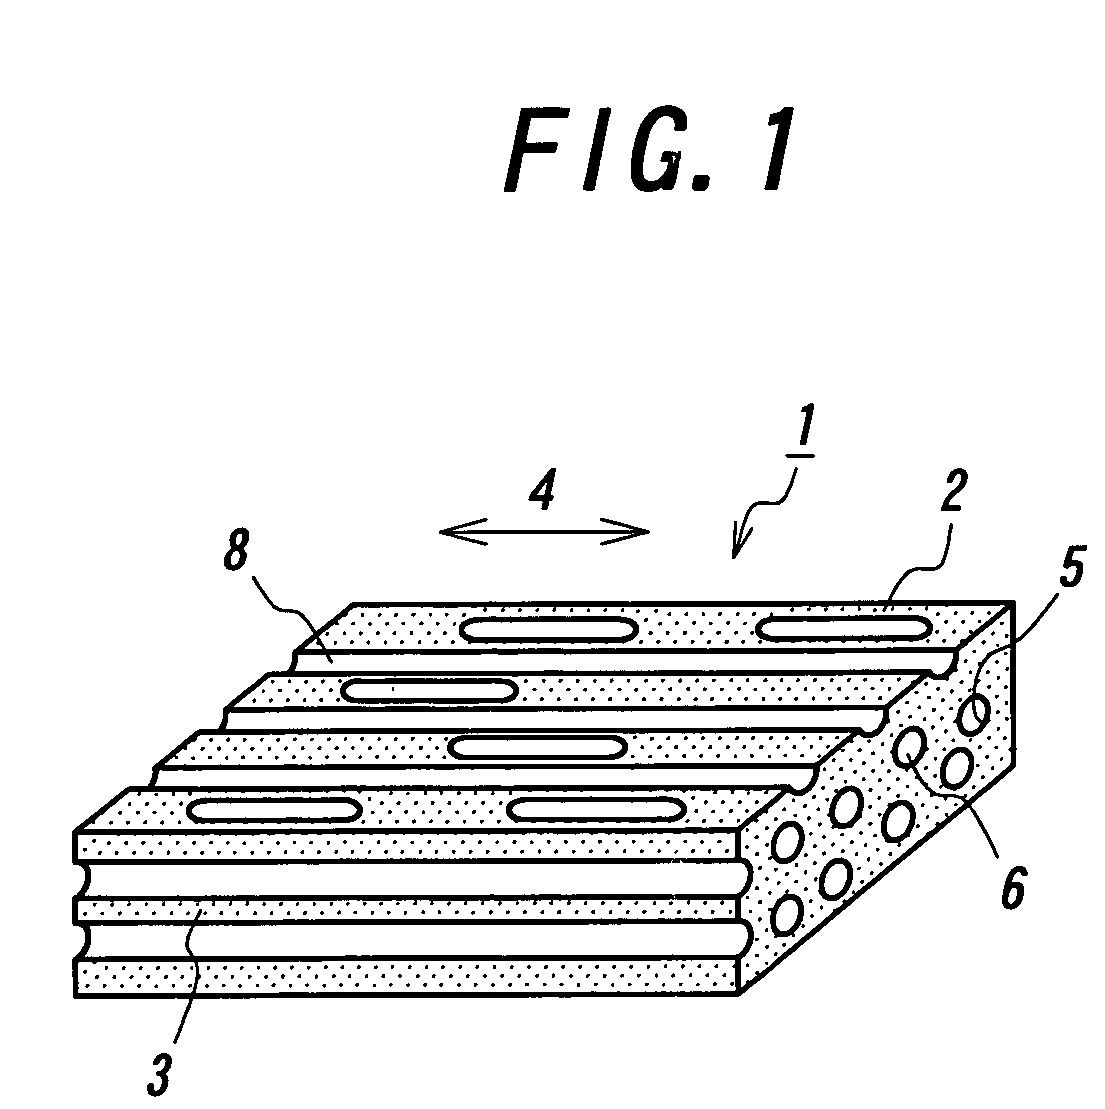 Pneumatic tire including toriodally continuous cells and method of producing same